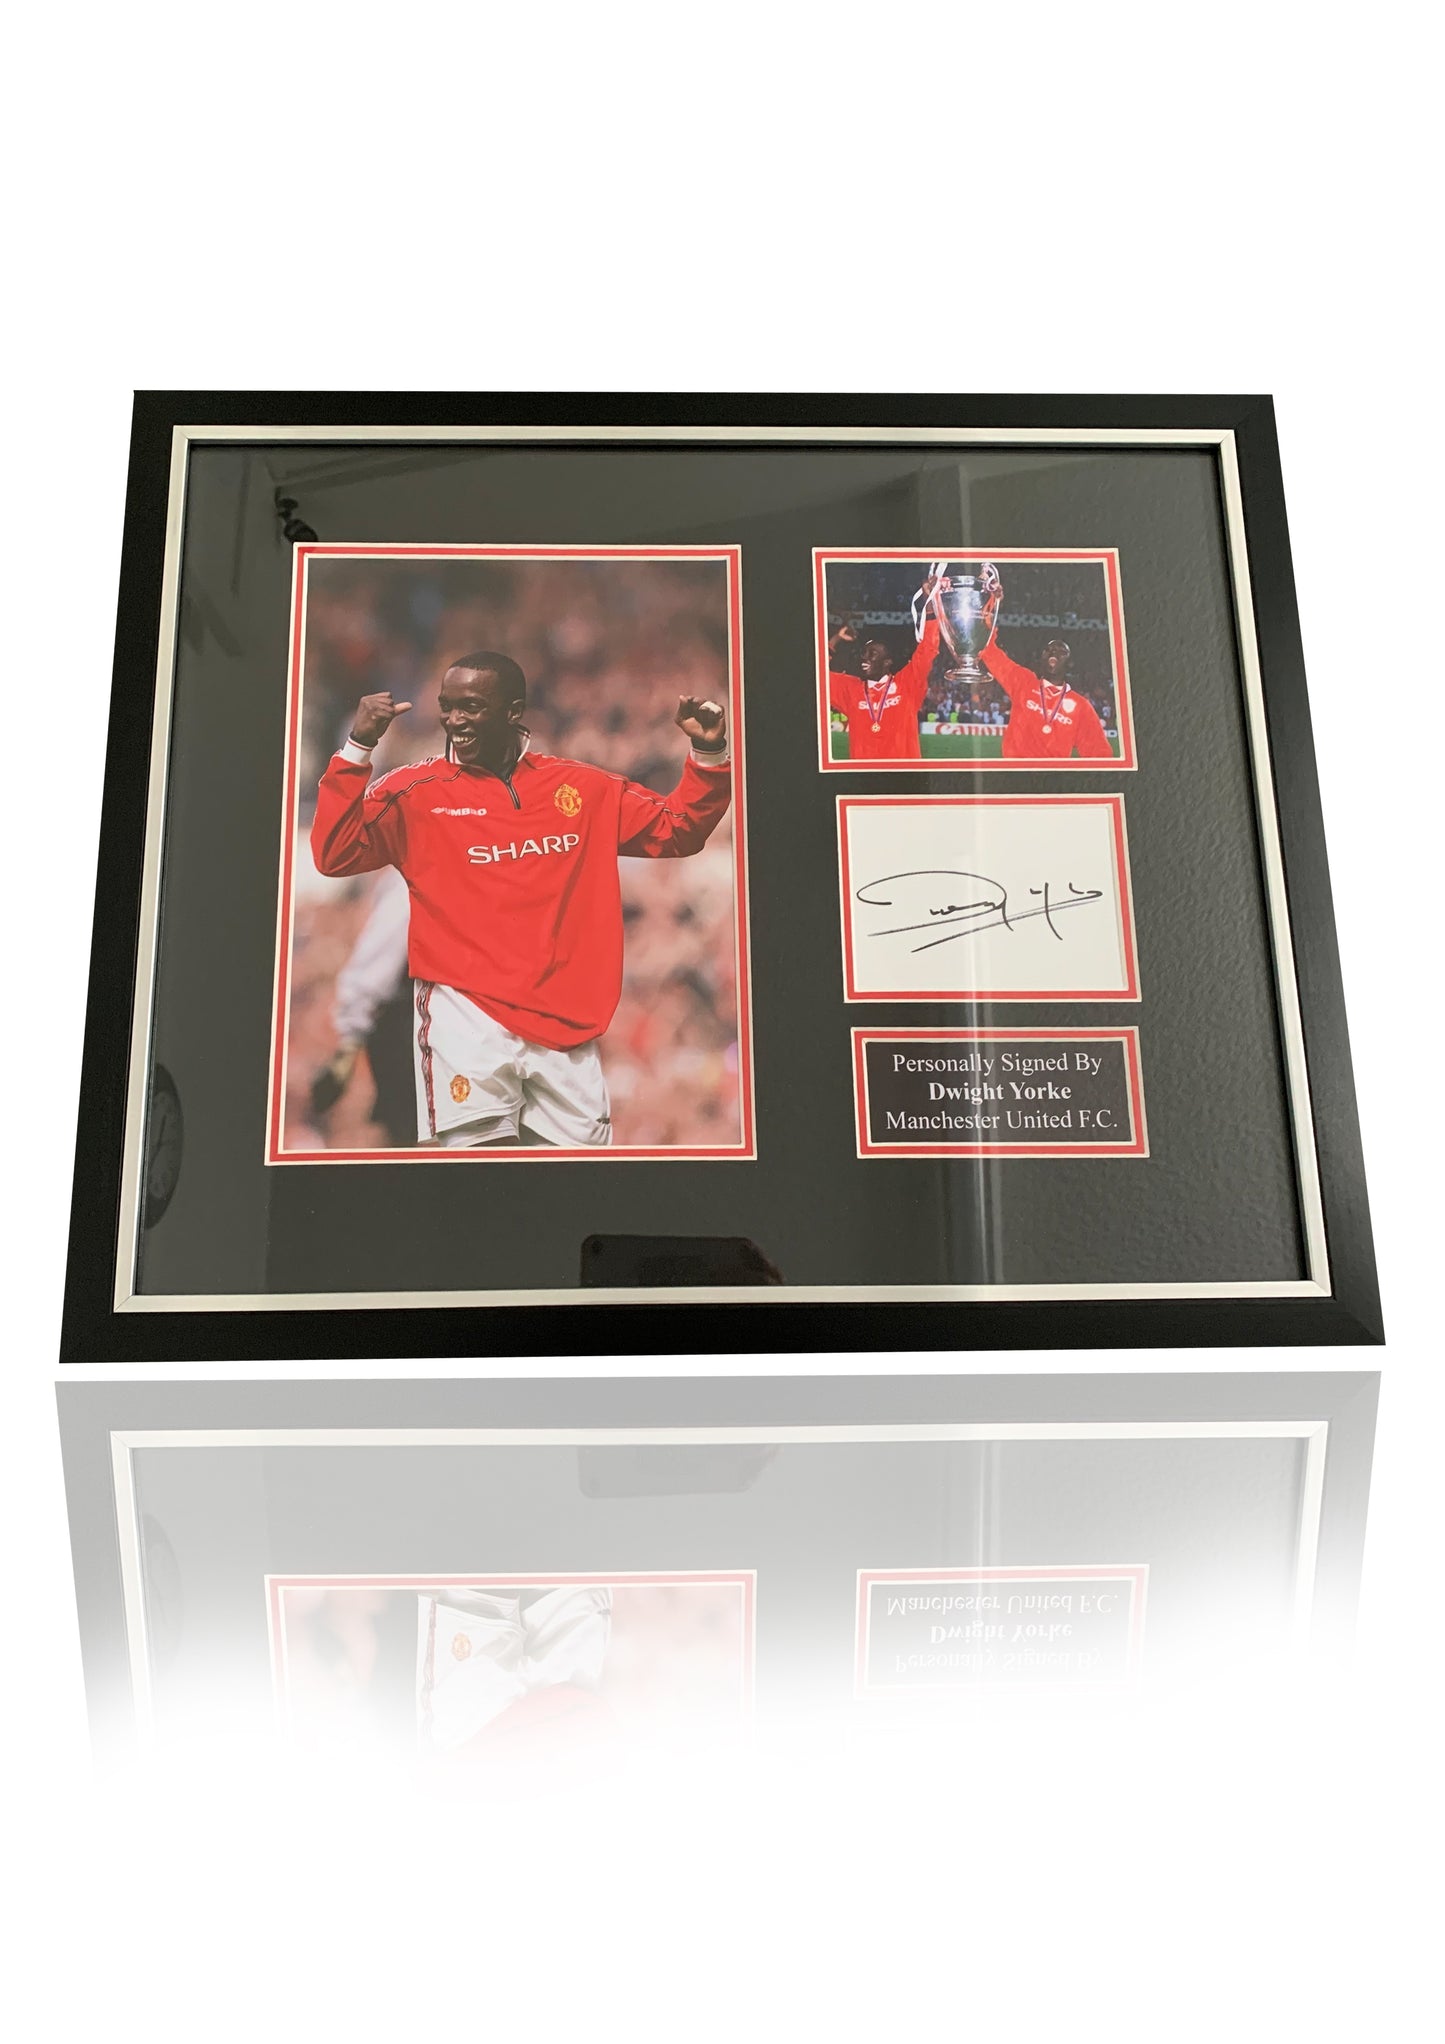 Dwight Yorke Manchester United hand signed framed photo card montage